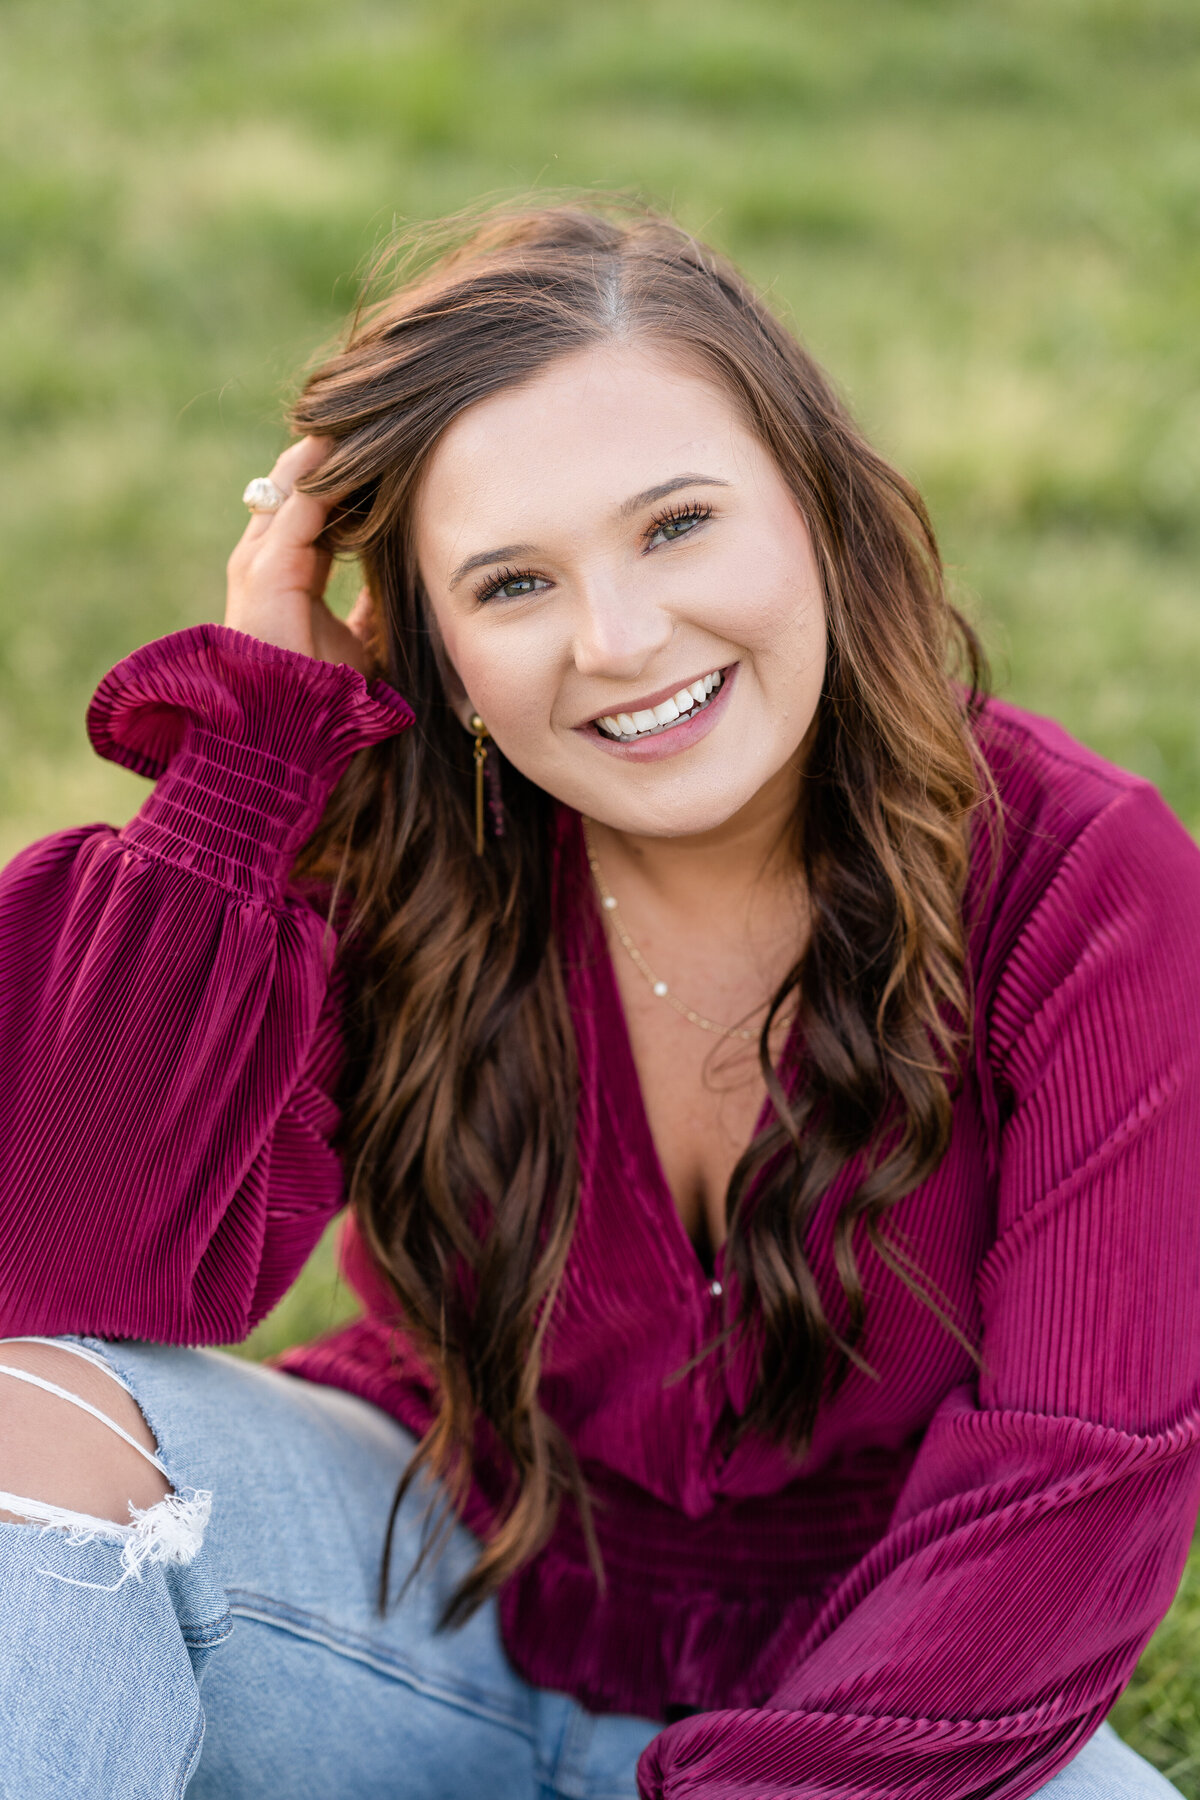 Texas A&M senior girl sitting on the ground and leaning on hand while wearing maroon shirt and jeans